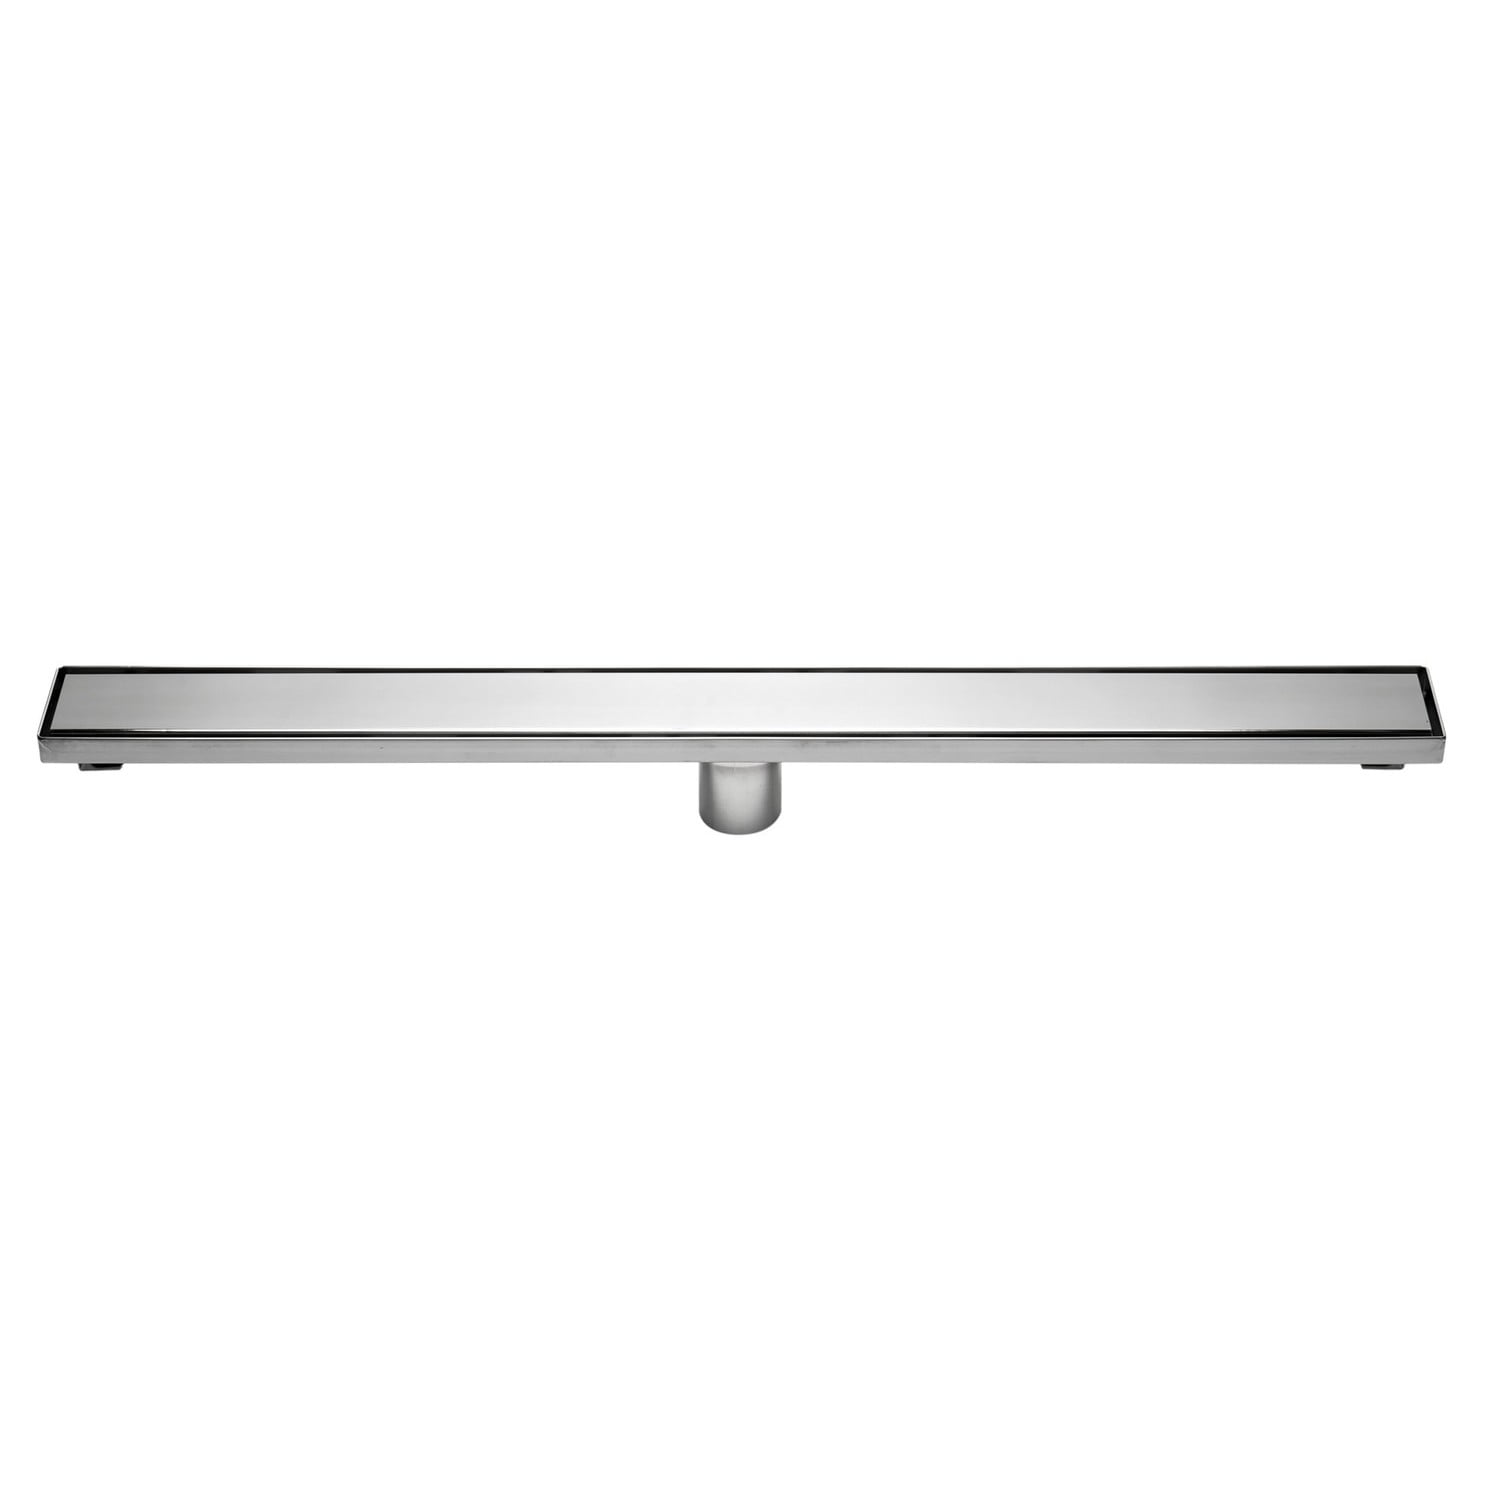 Abld32b-pss Modern Polished Stainless Steel Linear Shower Drain With Solid Cover - 32 In.